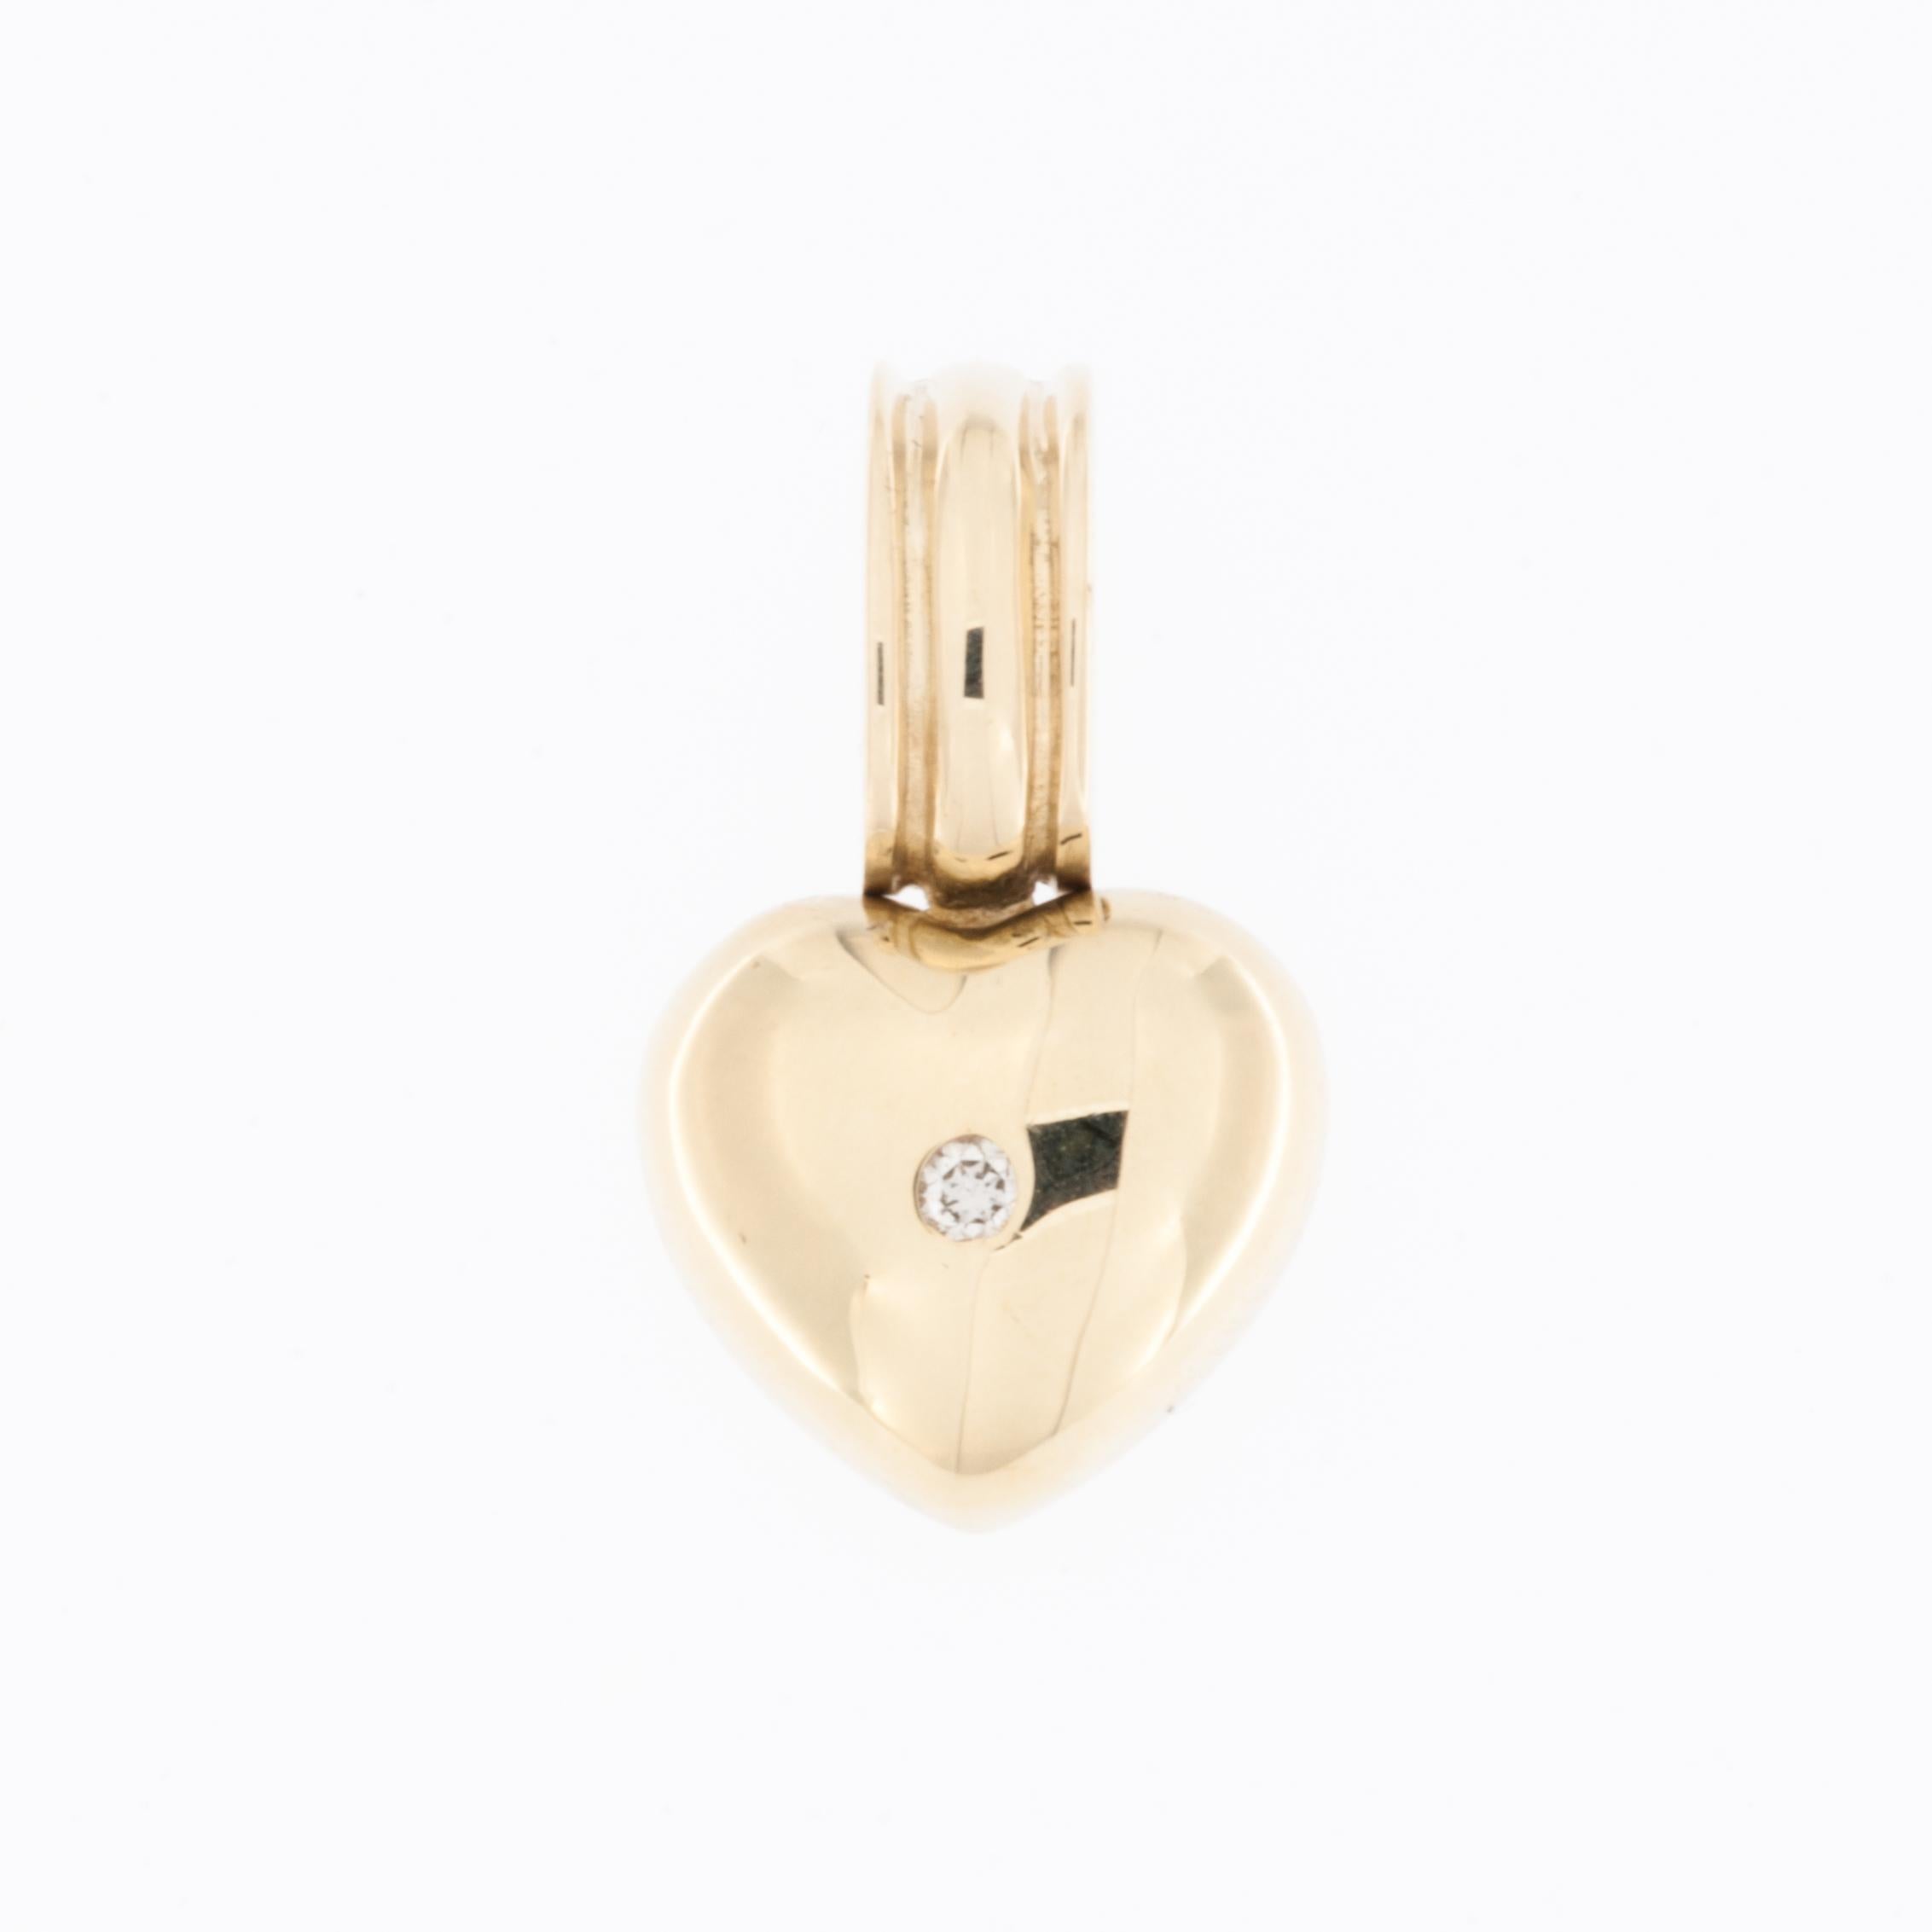 This exquisite piece of jewelry is crafted from high-quality 14 karat yellow gold, ensuring both durability and a warm, lustrous appearance. The central focus of the design is a charming heart shape, symbolizing love and affection. The smooth and